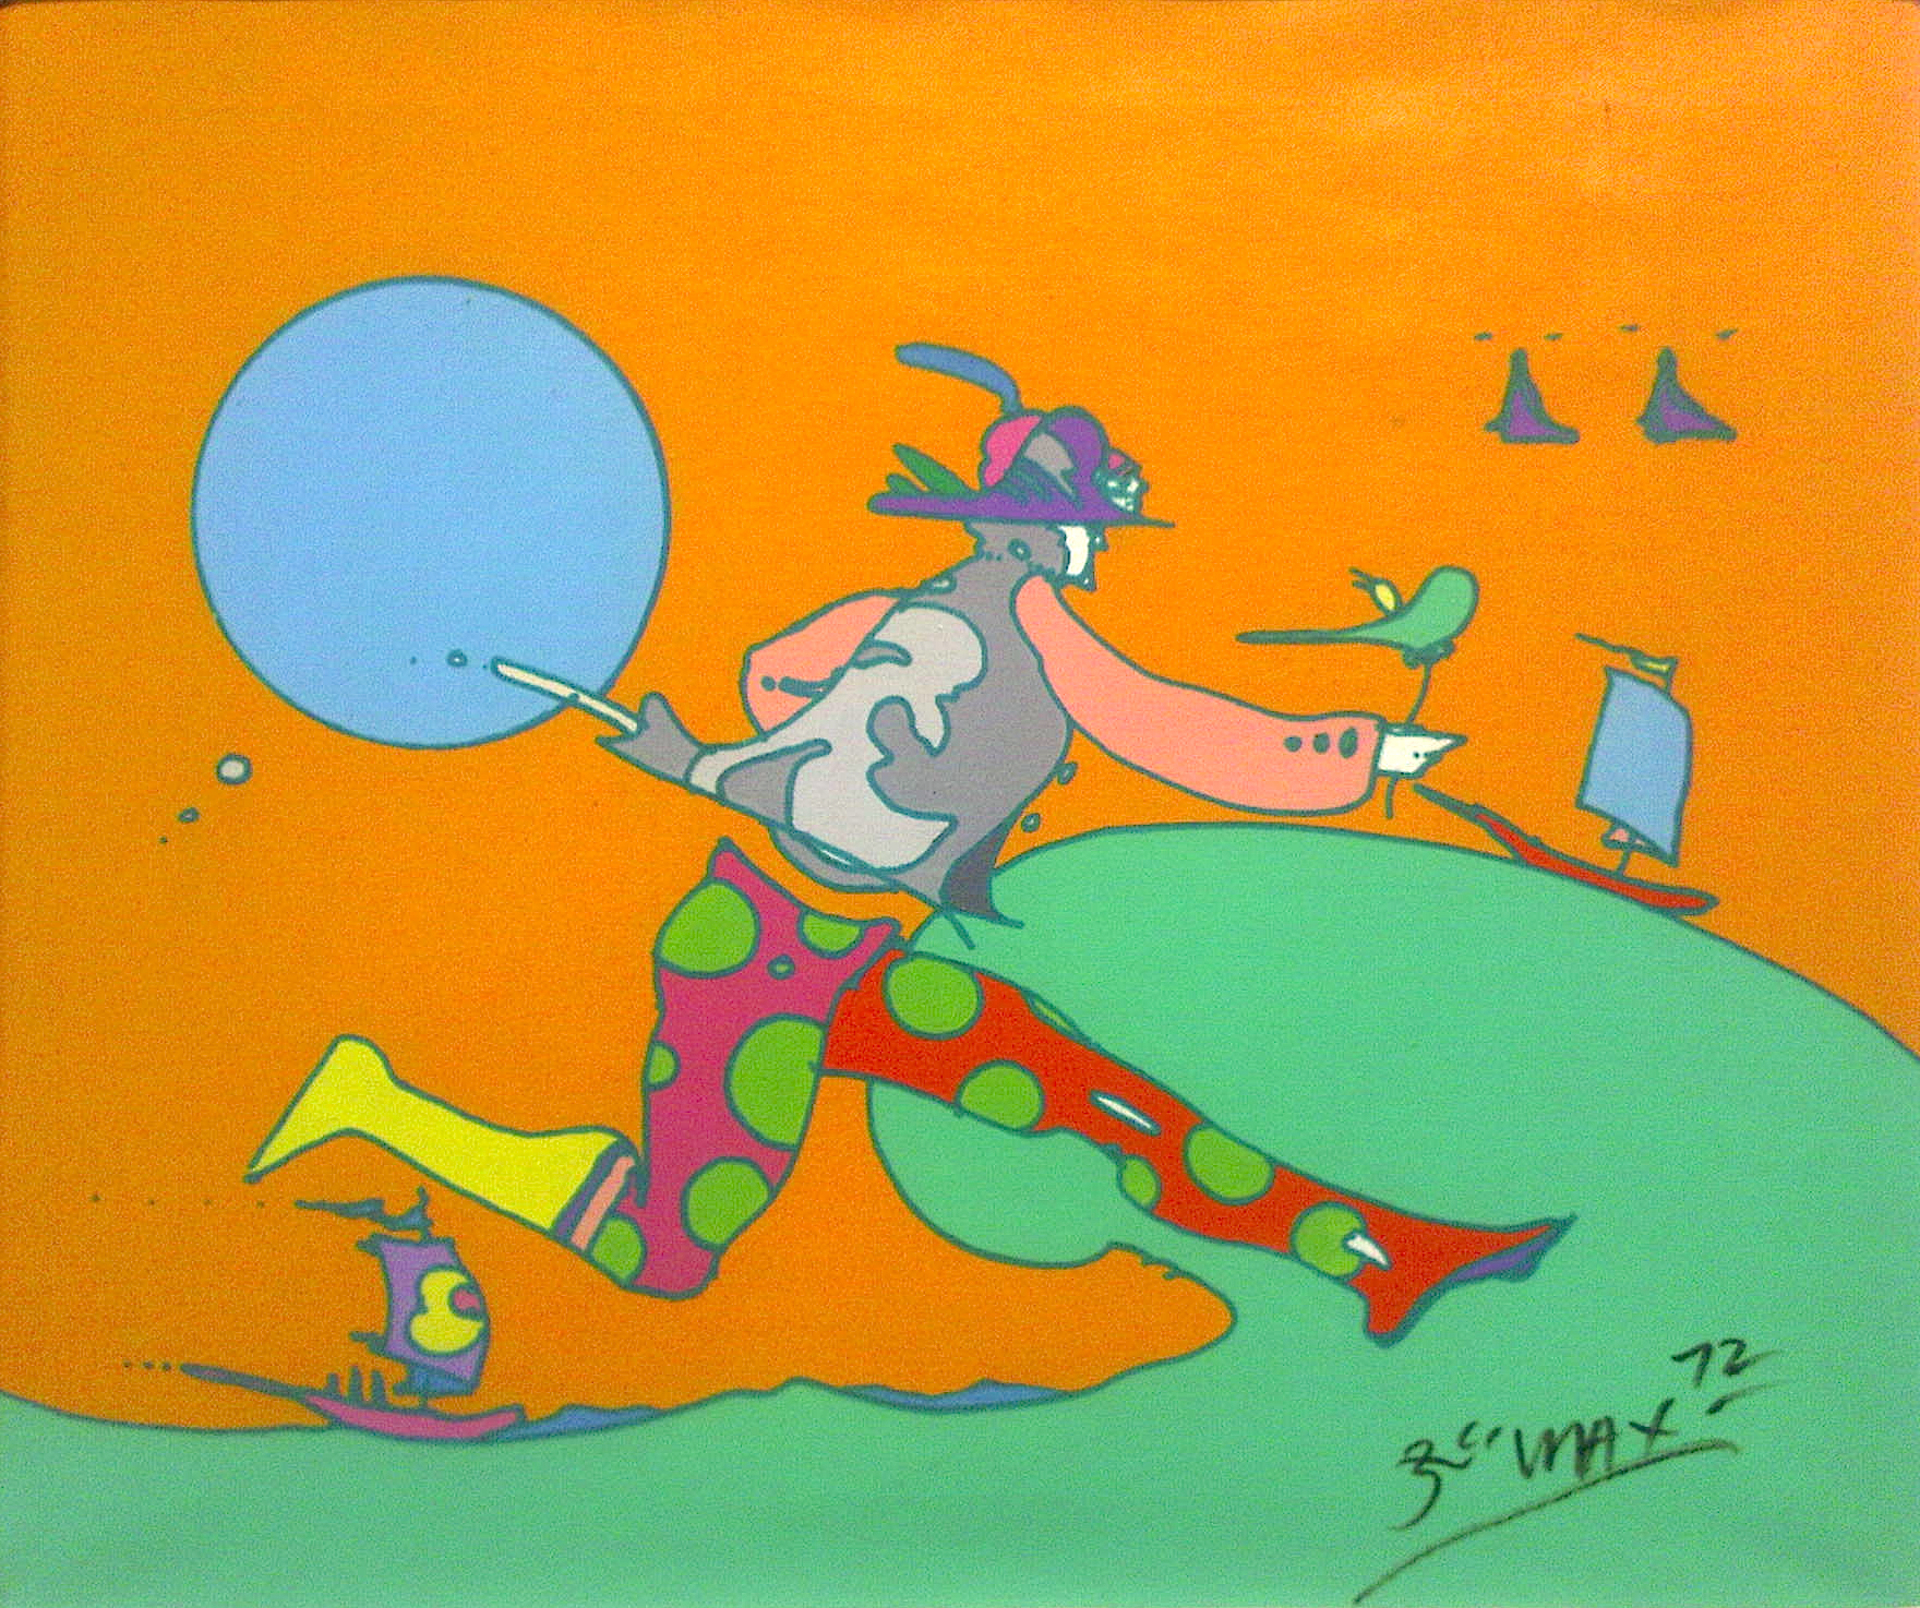 Jumper by Peter Max